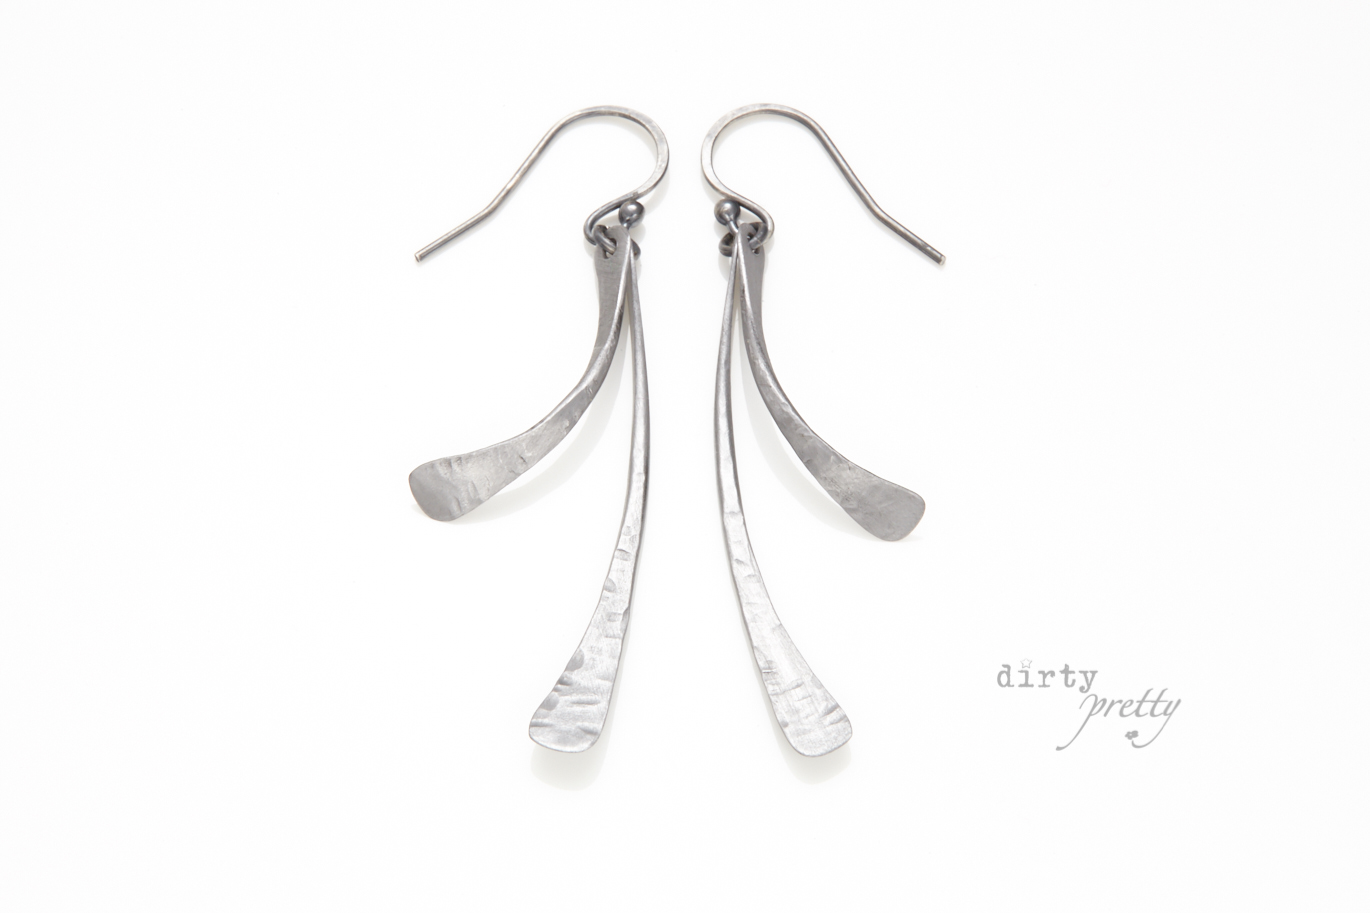 6th Year Anniversary Gift Ideas - 6th anniversary Small Feather Iron Earrings by dirtypretty artwear